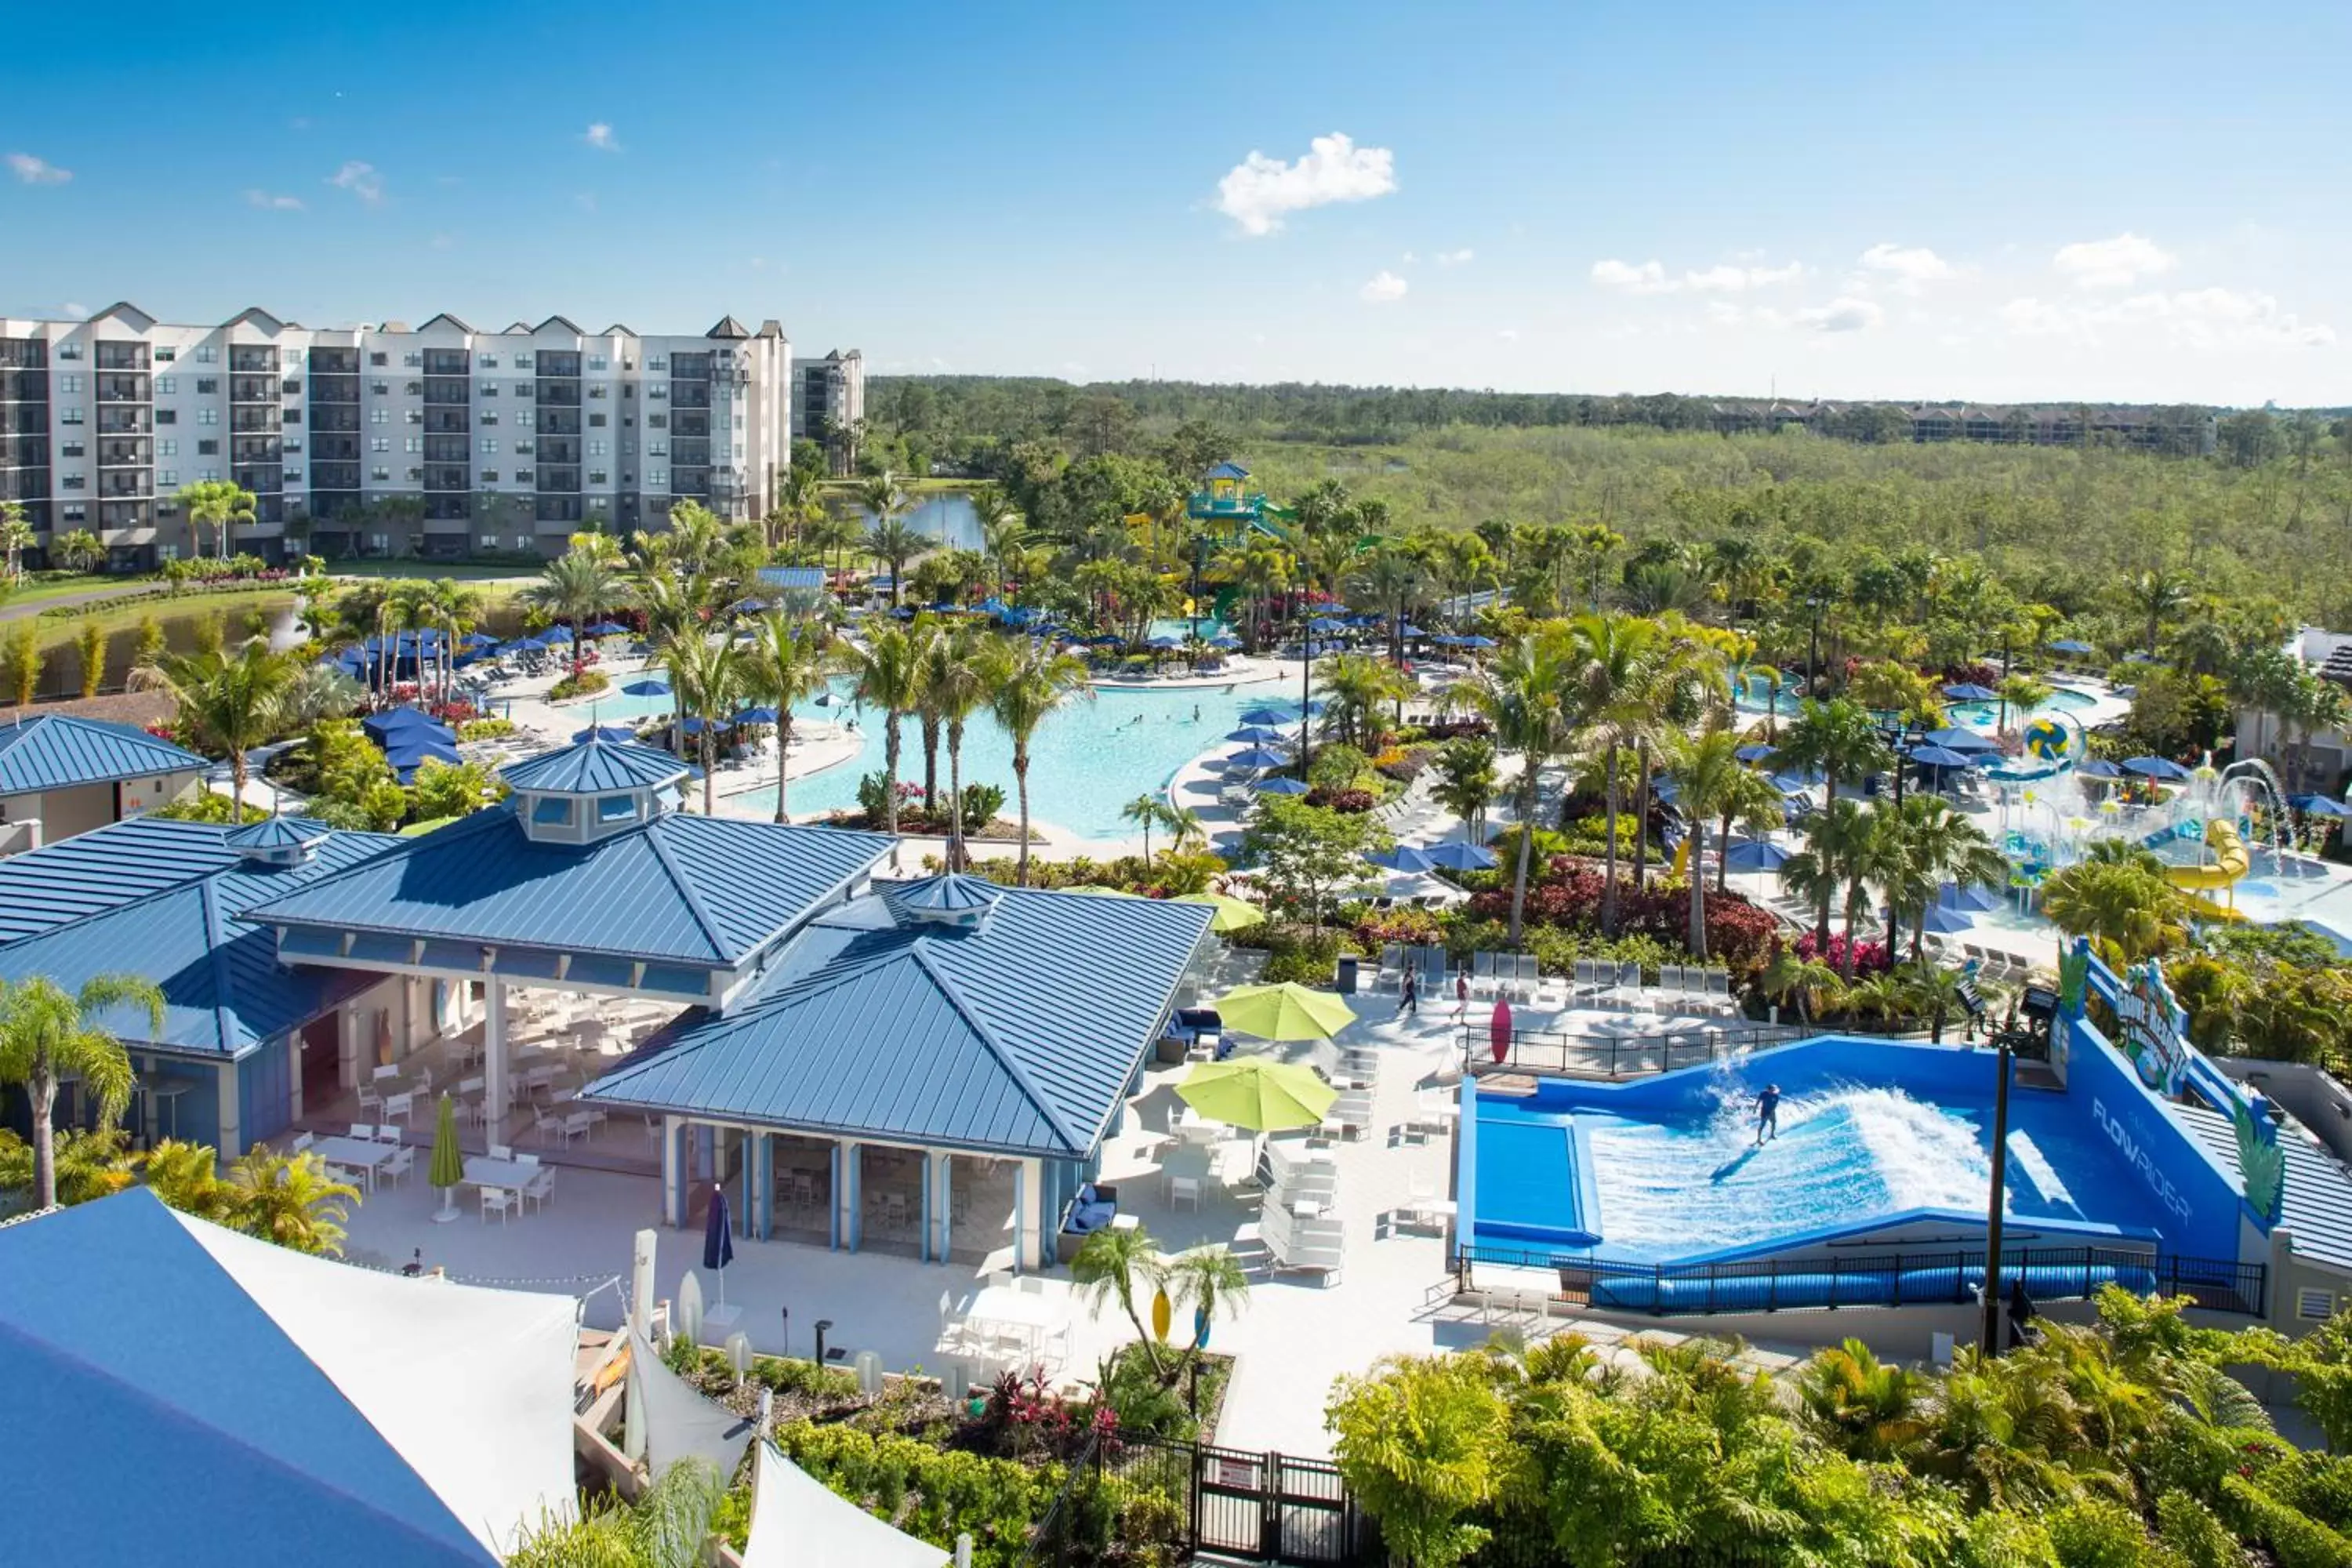 Bird's eye view, Pool View in The Grove Resort & Water Park Orlando